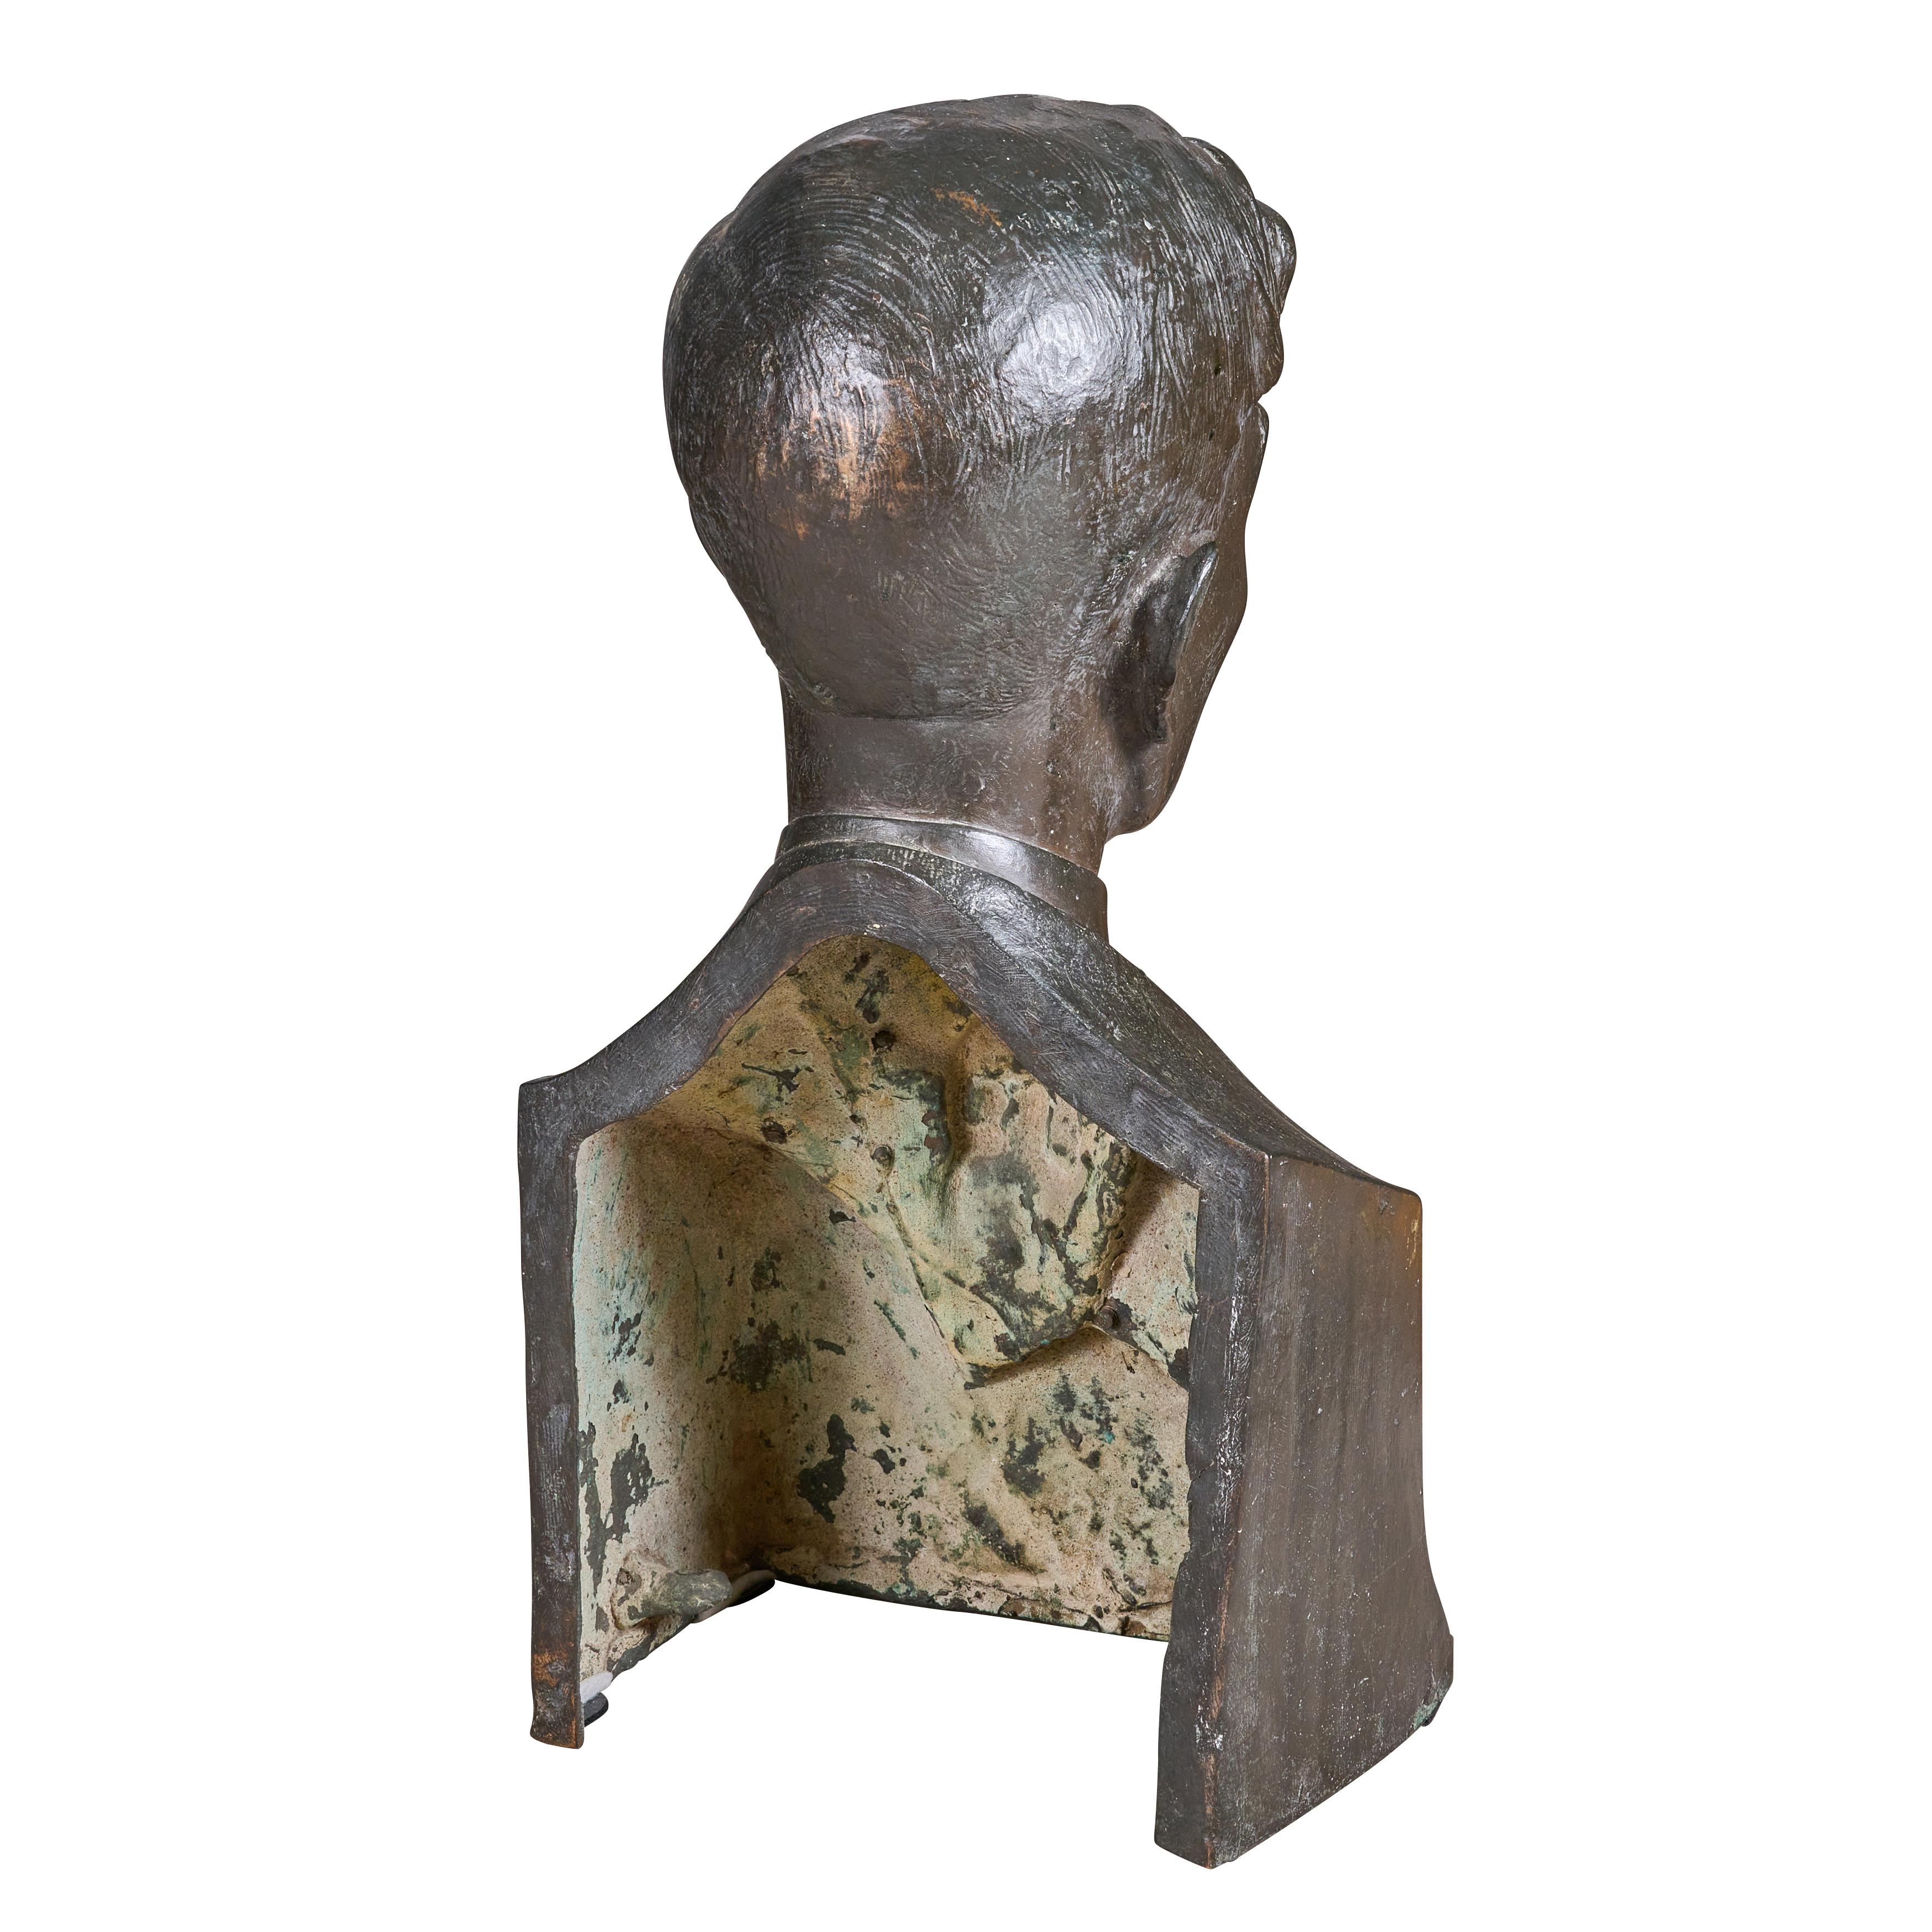 Fantastic bronze bust of A. Campi, artist. Great quality. Signed.

